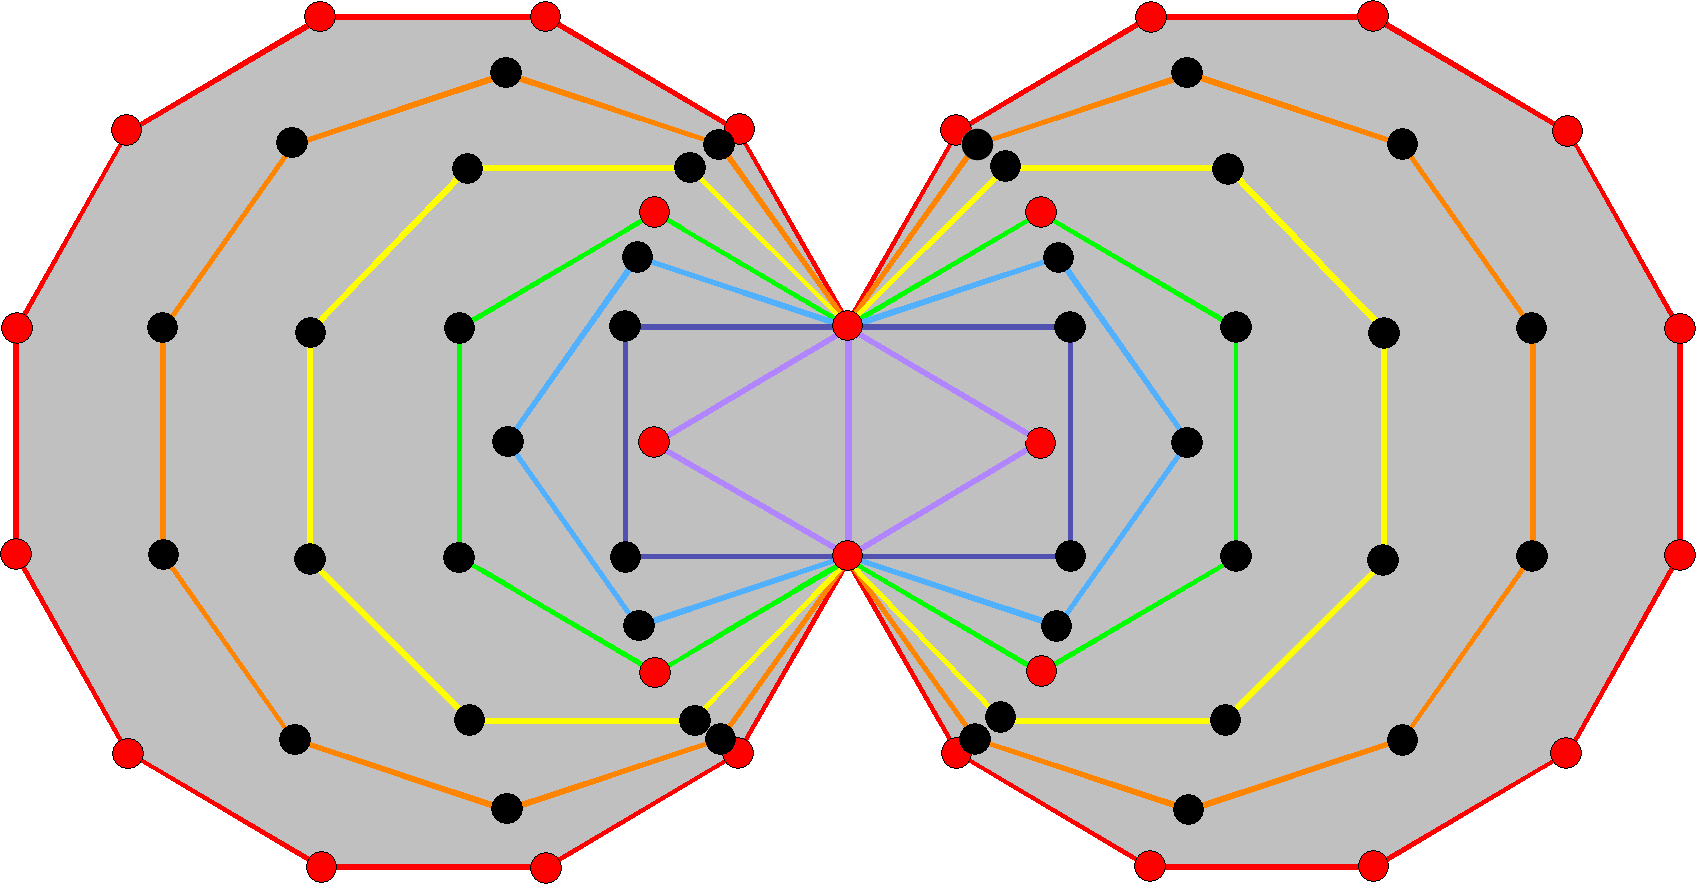 42-28 division of corners in inner Tree of Life